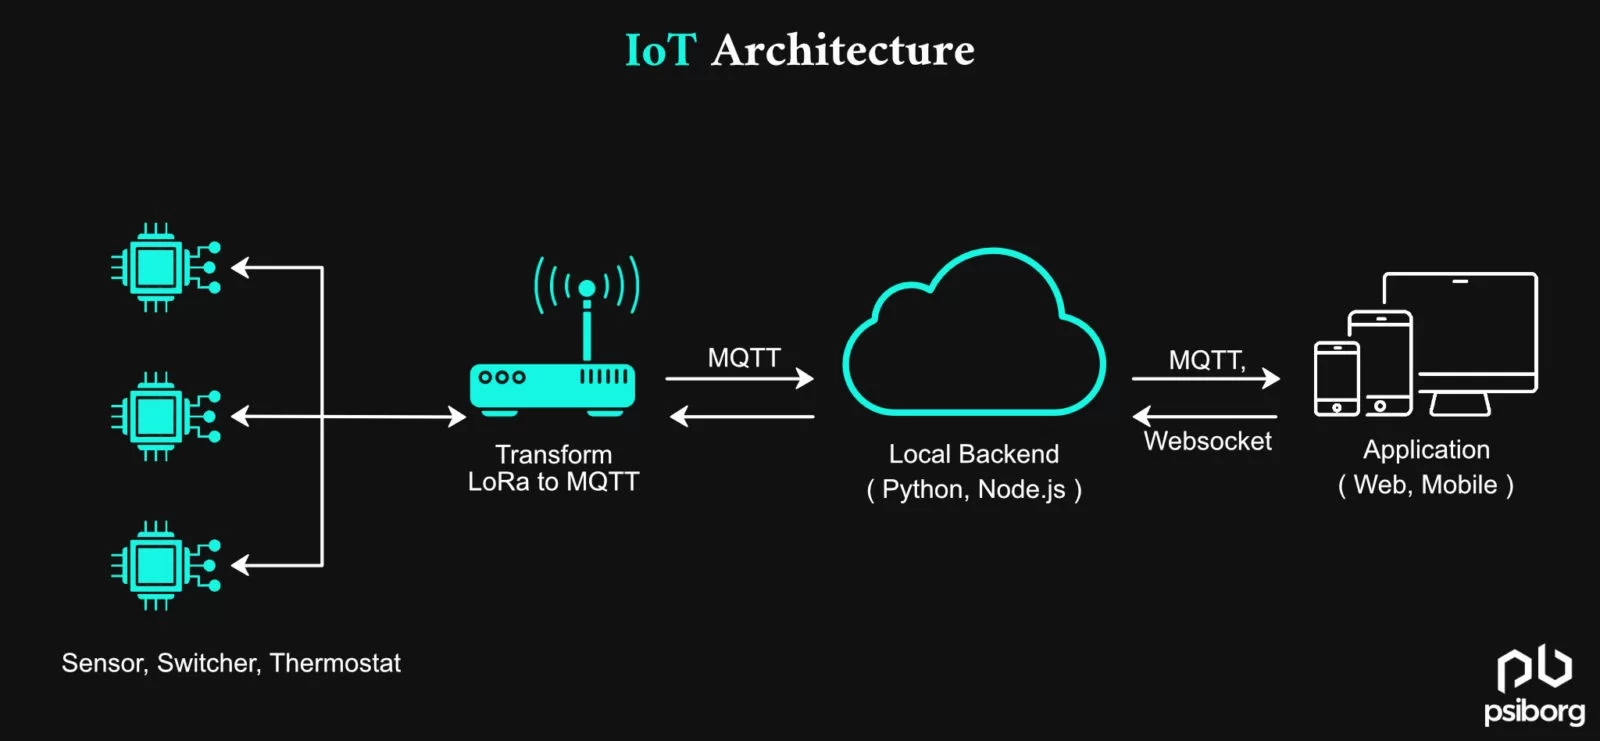 Technology Requirement in IoT